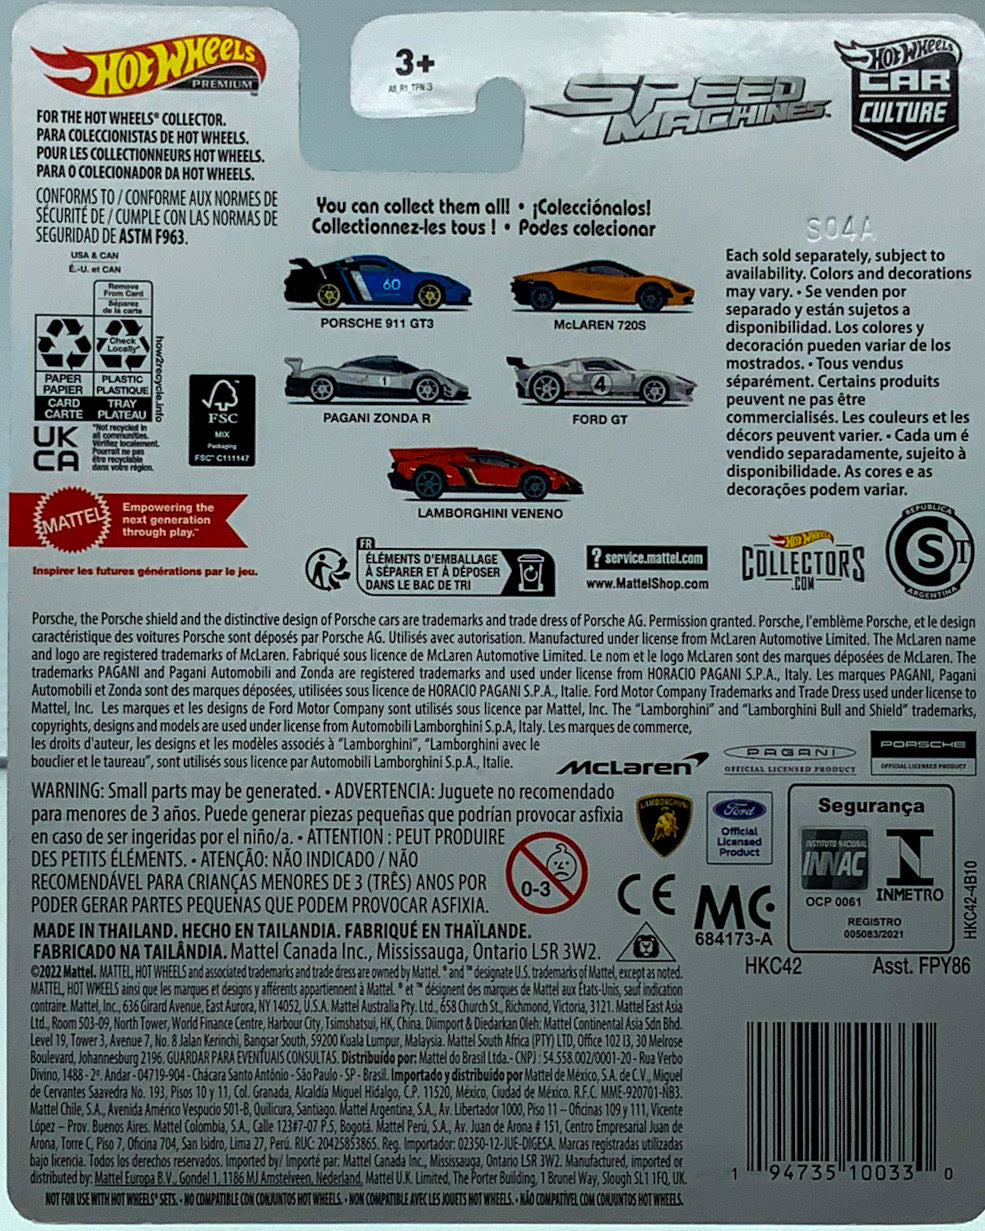 Buy at Tatoyshop.com Products Direct from Shipper Manufacturer Box Made in Thailand Hot Wheels Cars Toys Mattel FPY86 00887961619805   Buy at www.tatoyshop.com Back of the Card shows the 5 Cars on the Series  Porsche 911 GT3 (2022) 1/5 McLaren 720S 2/5 Pagani Zonda R 3/5 Ford GT LM 4/5 Lamborghini Veneno 5/5